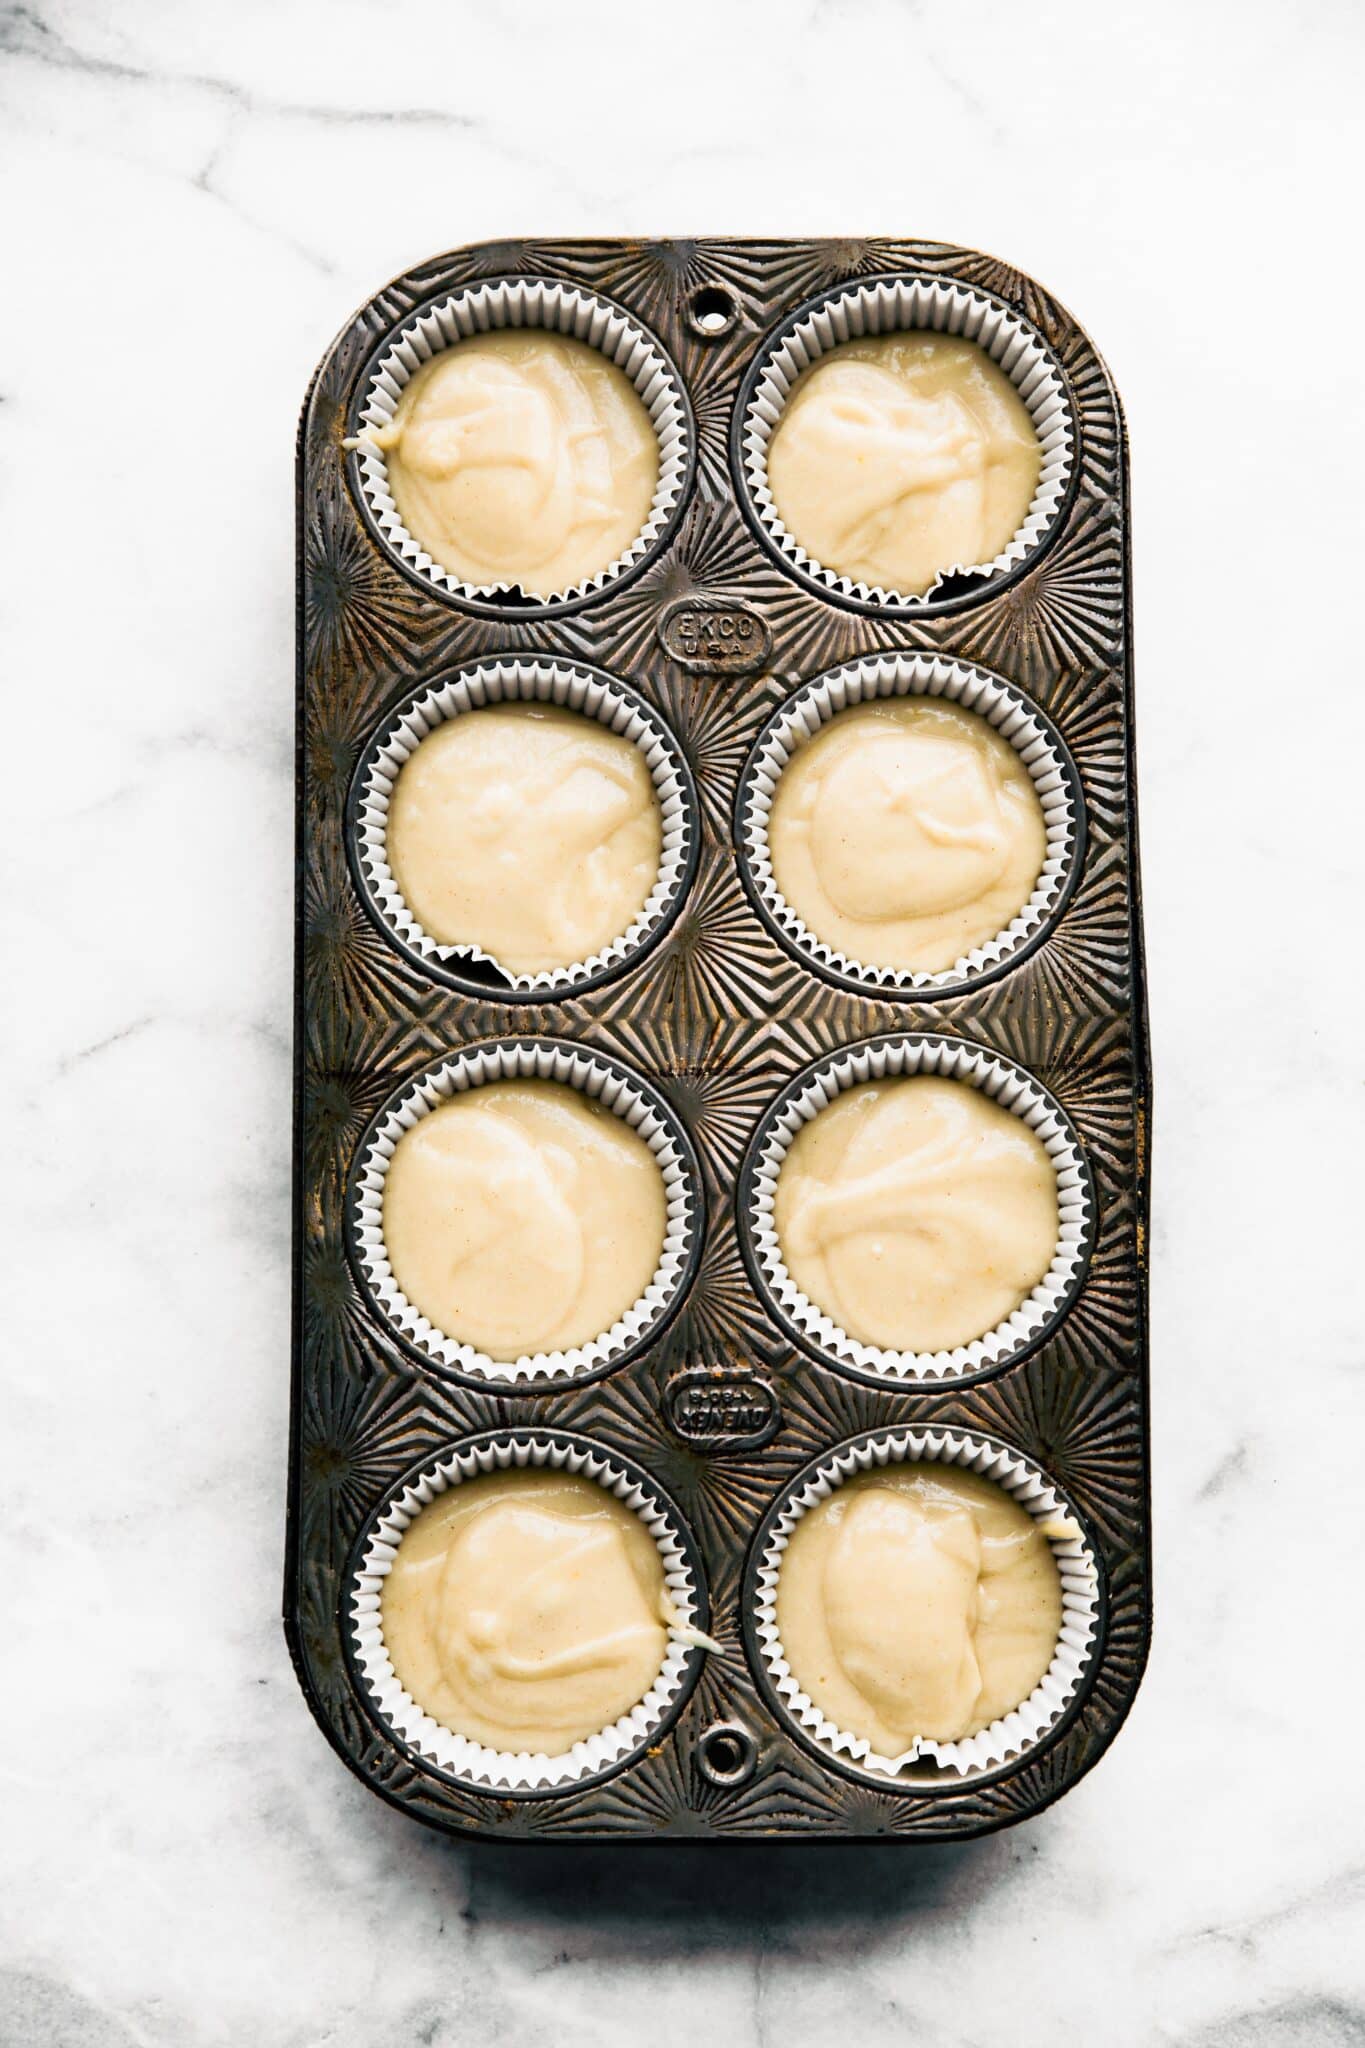 Gluten free vanilla cupcake batter in 8 muffin liners in a vintage muffin tin.